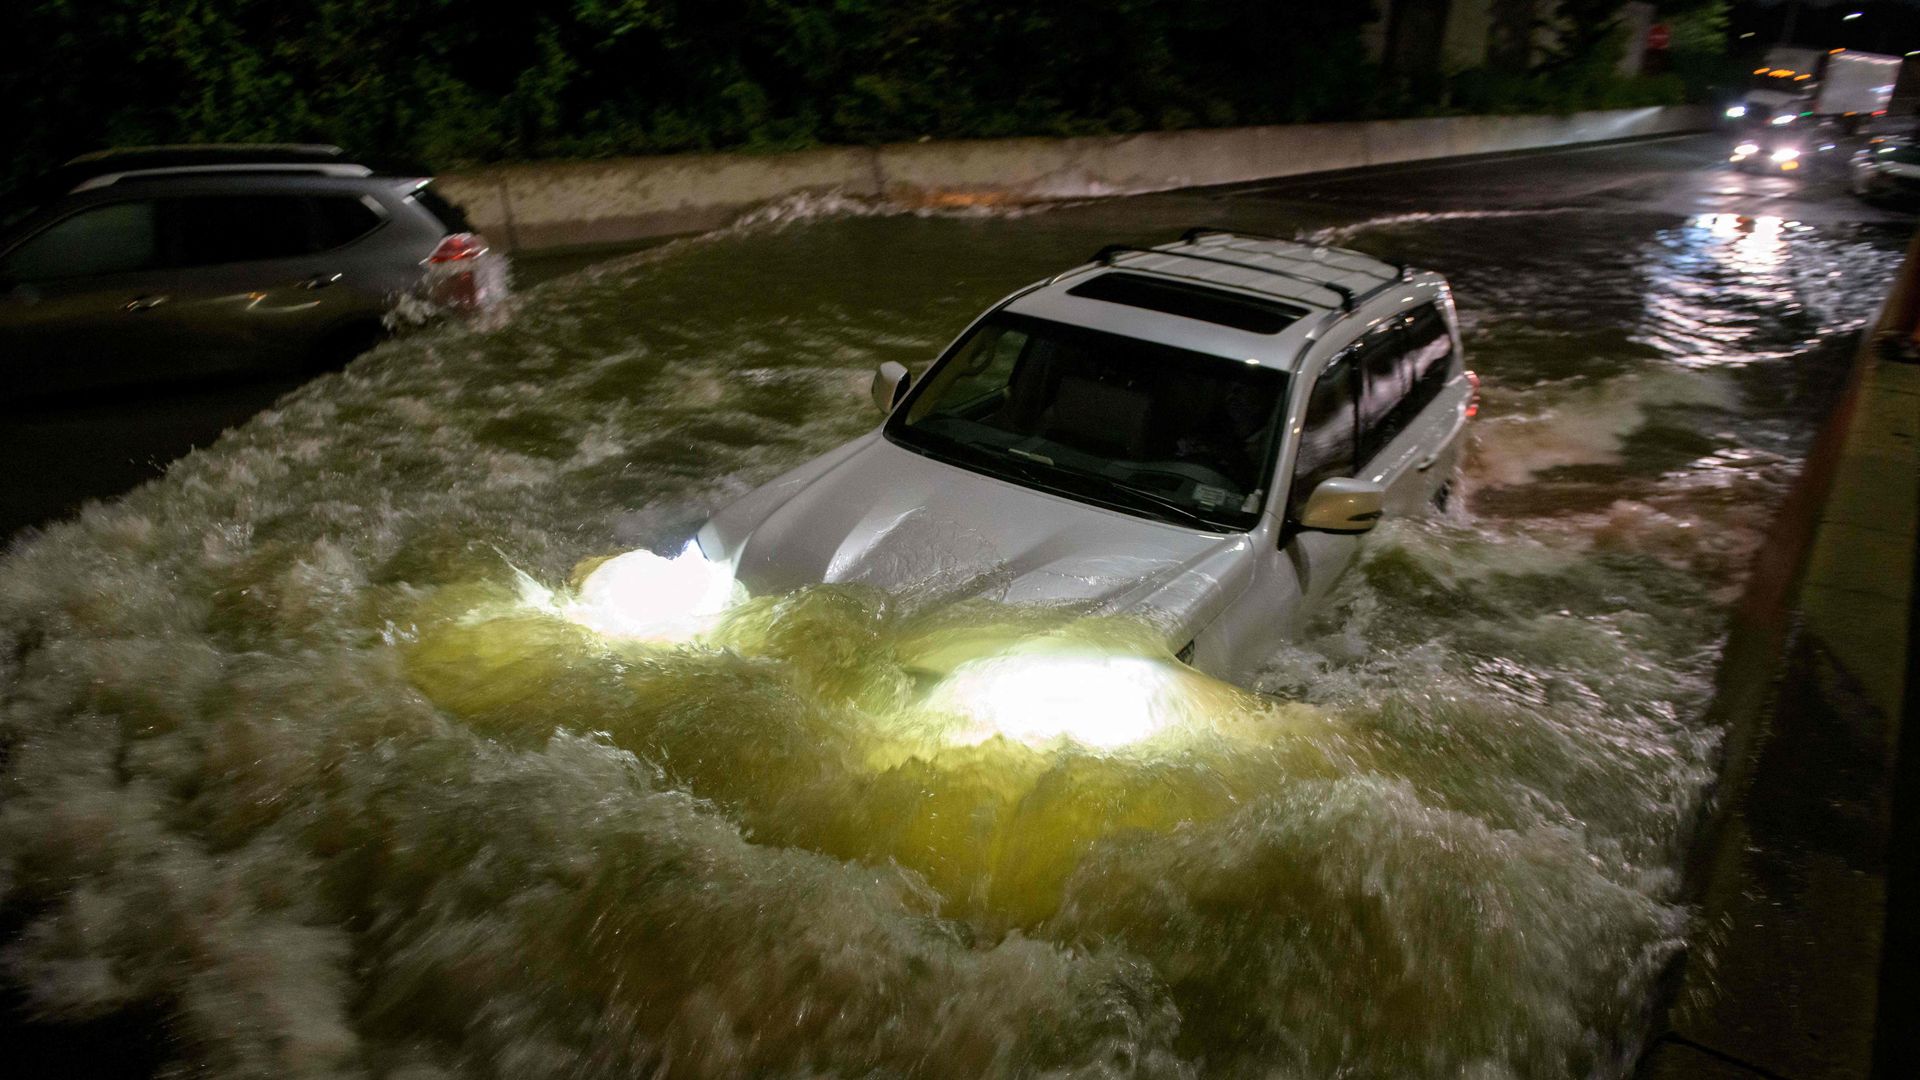 Flooded car in the middle of a flash flood event in Brooklyn on Sept. 2, 2021.